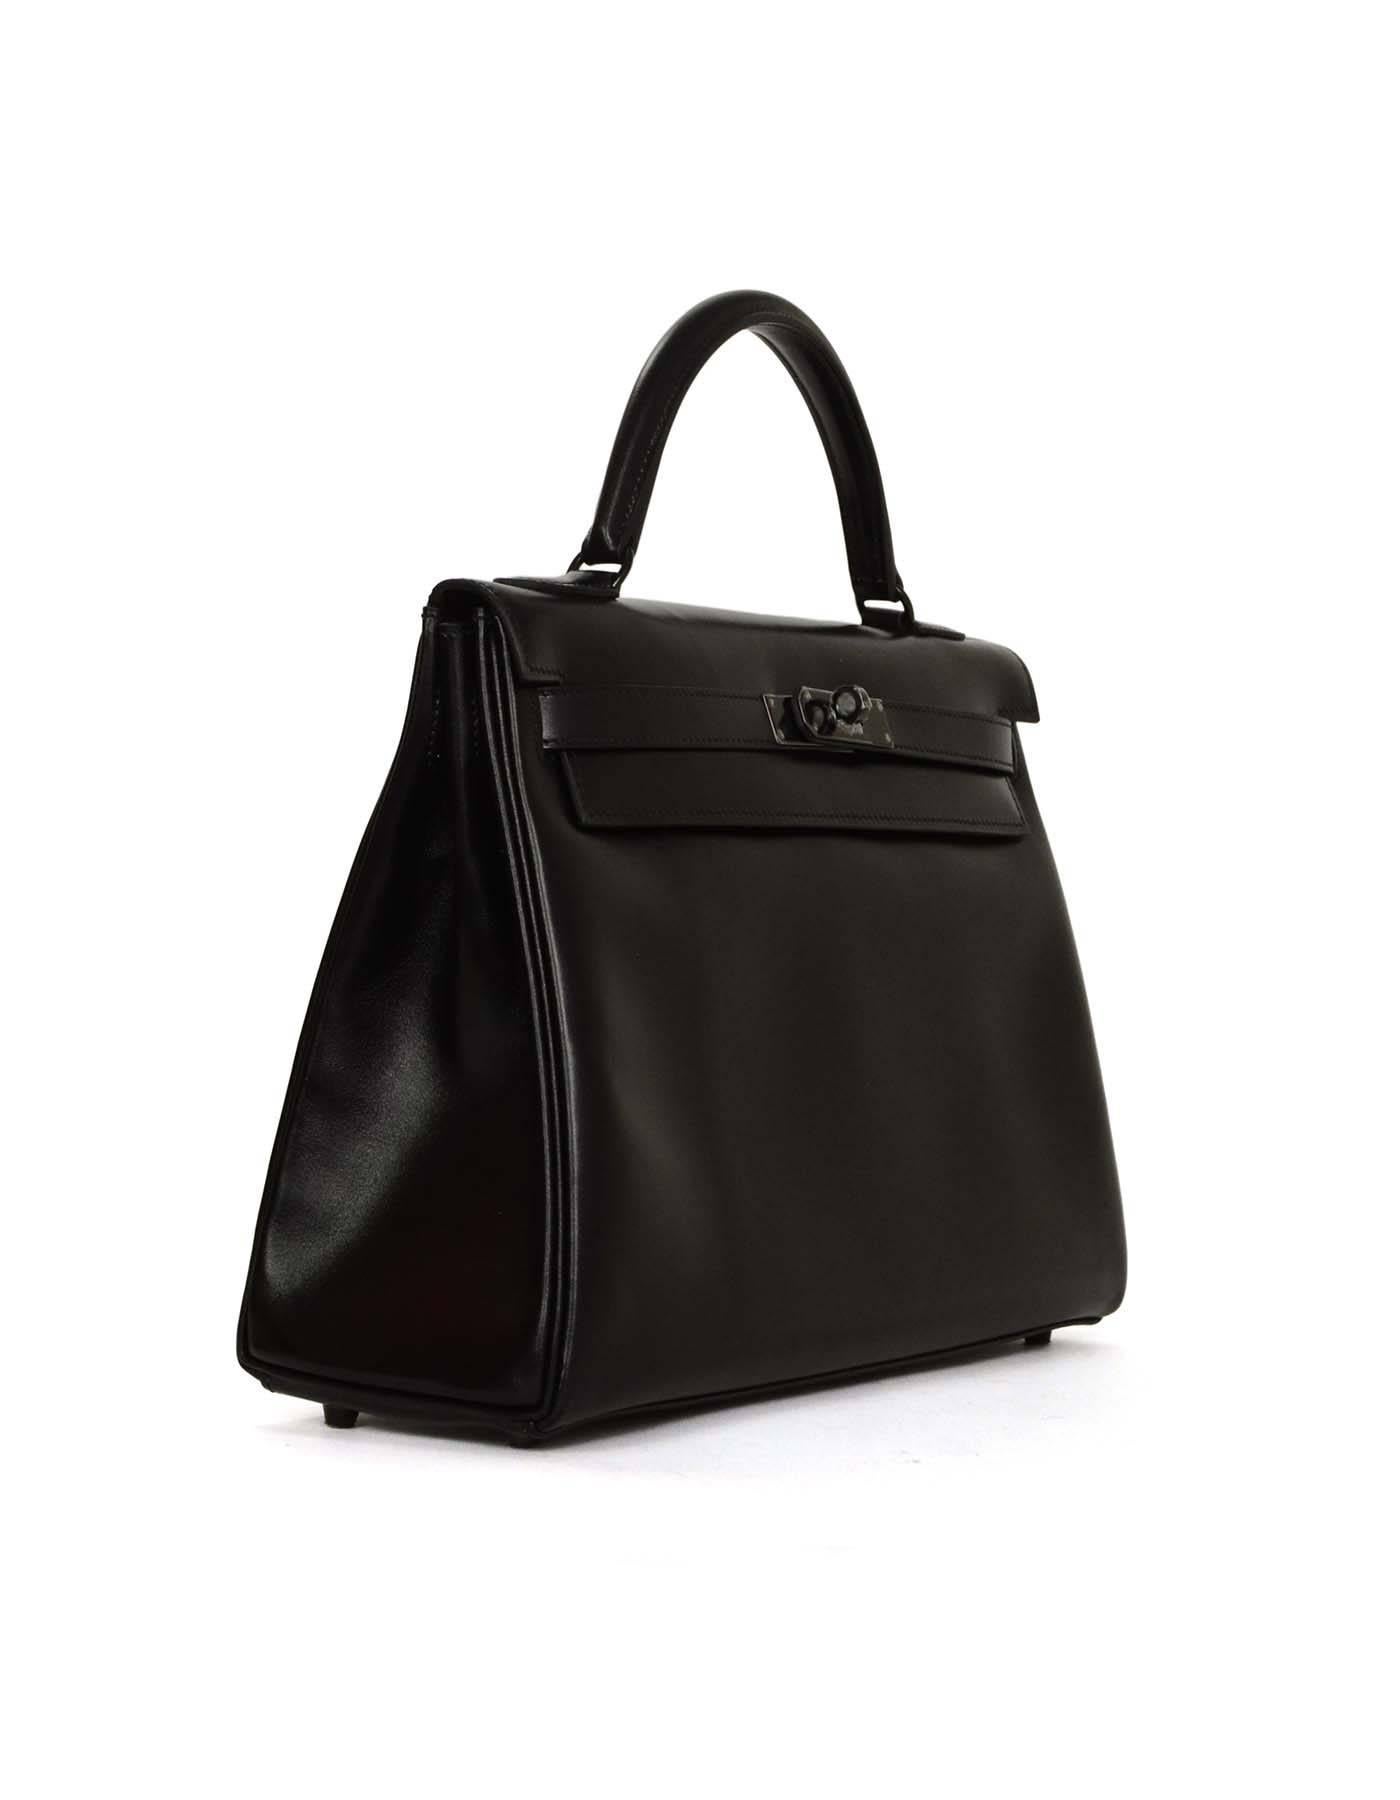 Hermes Ltd Ed. 'SO BLACK' Box Leather 32cm Kelly Bag
**Please note that this style was not produced with a bag strap**
Made In: France
Year of Production: 2010
Color: Black
Hardware: Black
Materials: Box leather
Lining: Black chevre